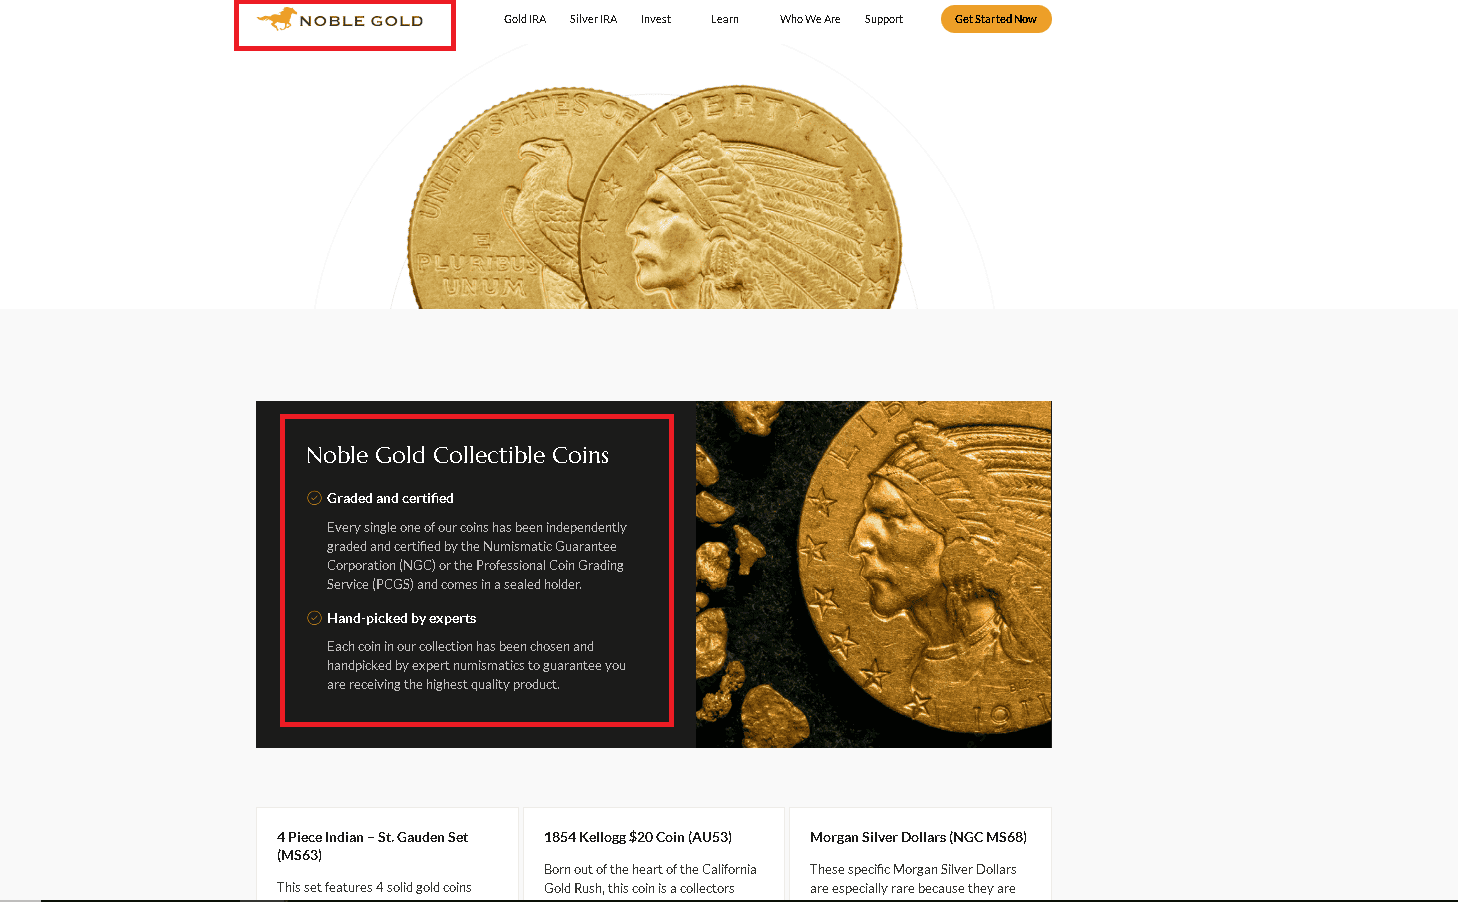 Noble Gold Investments sell rare (numismatic) coins to investors